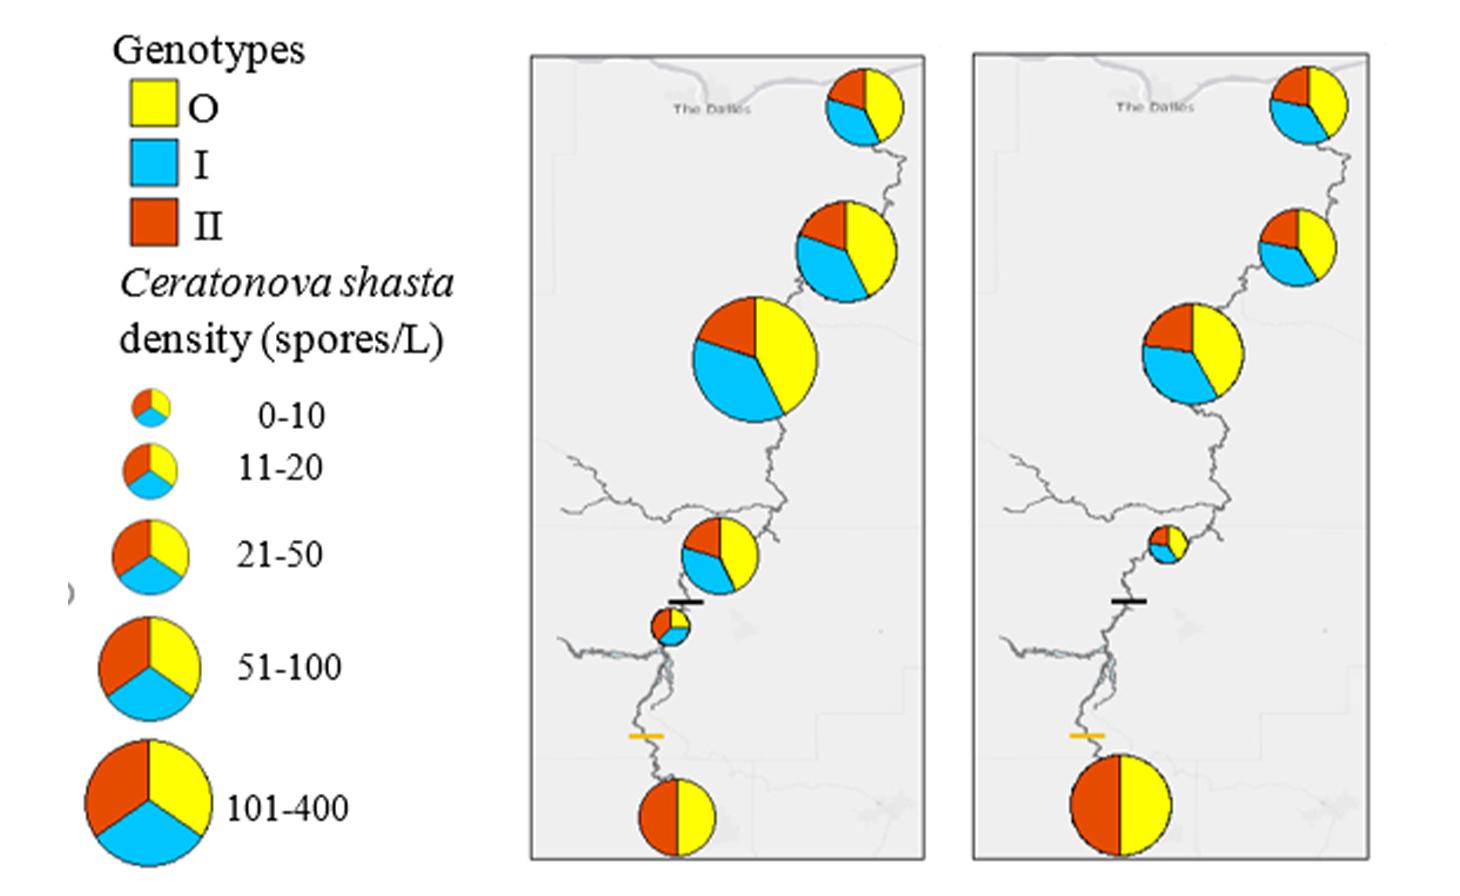 Two side-by-side maps of the Deschutes River labeled with Ceratonova shasta density (spores/L) by sample sites in red, blue and yellow pie charts indicating range of density.